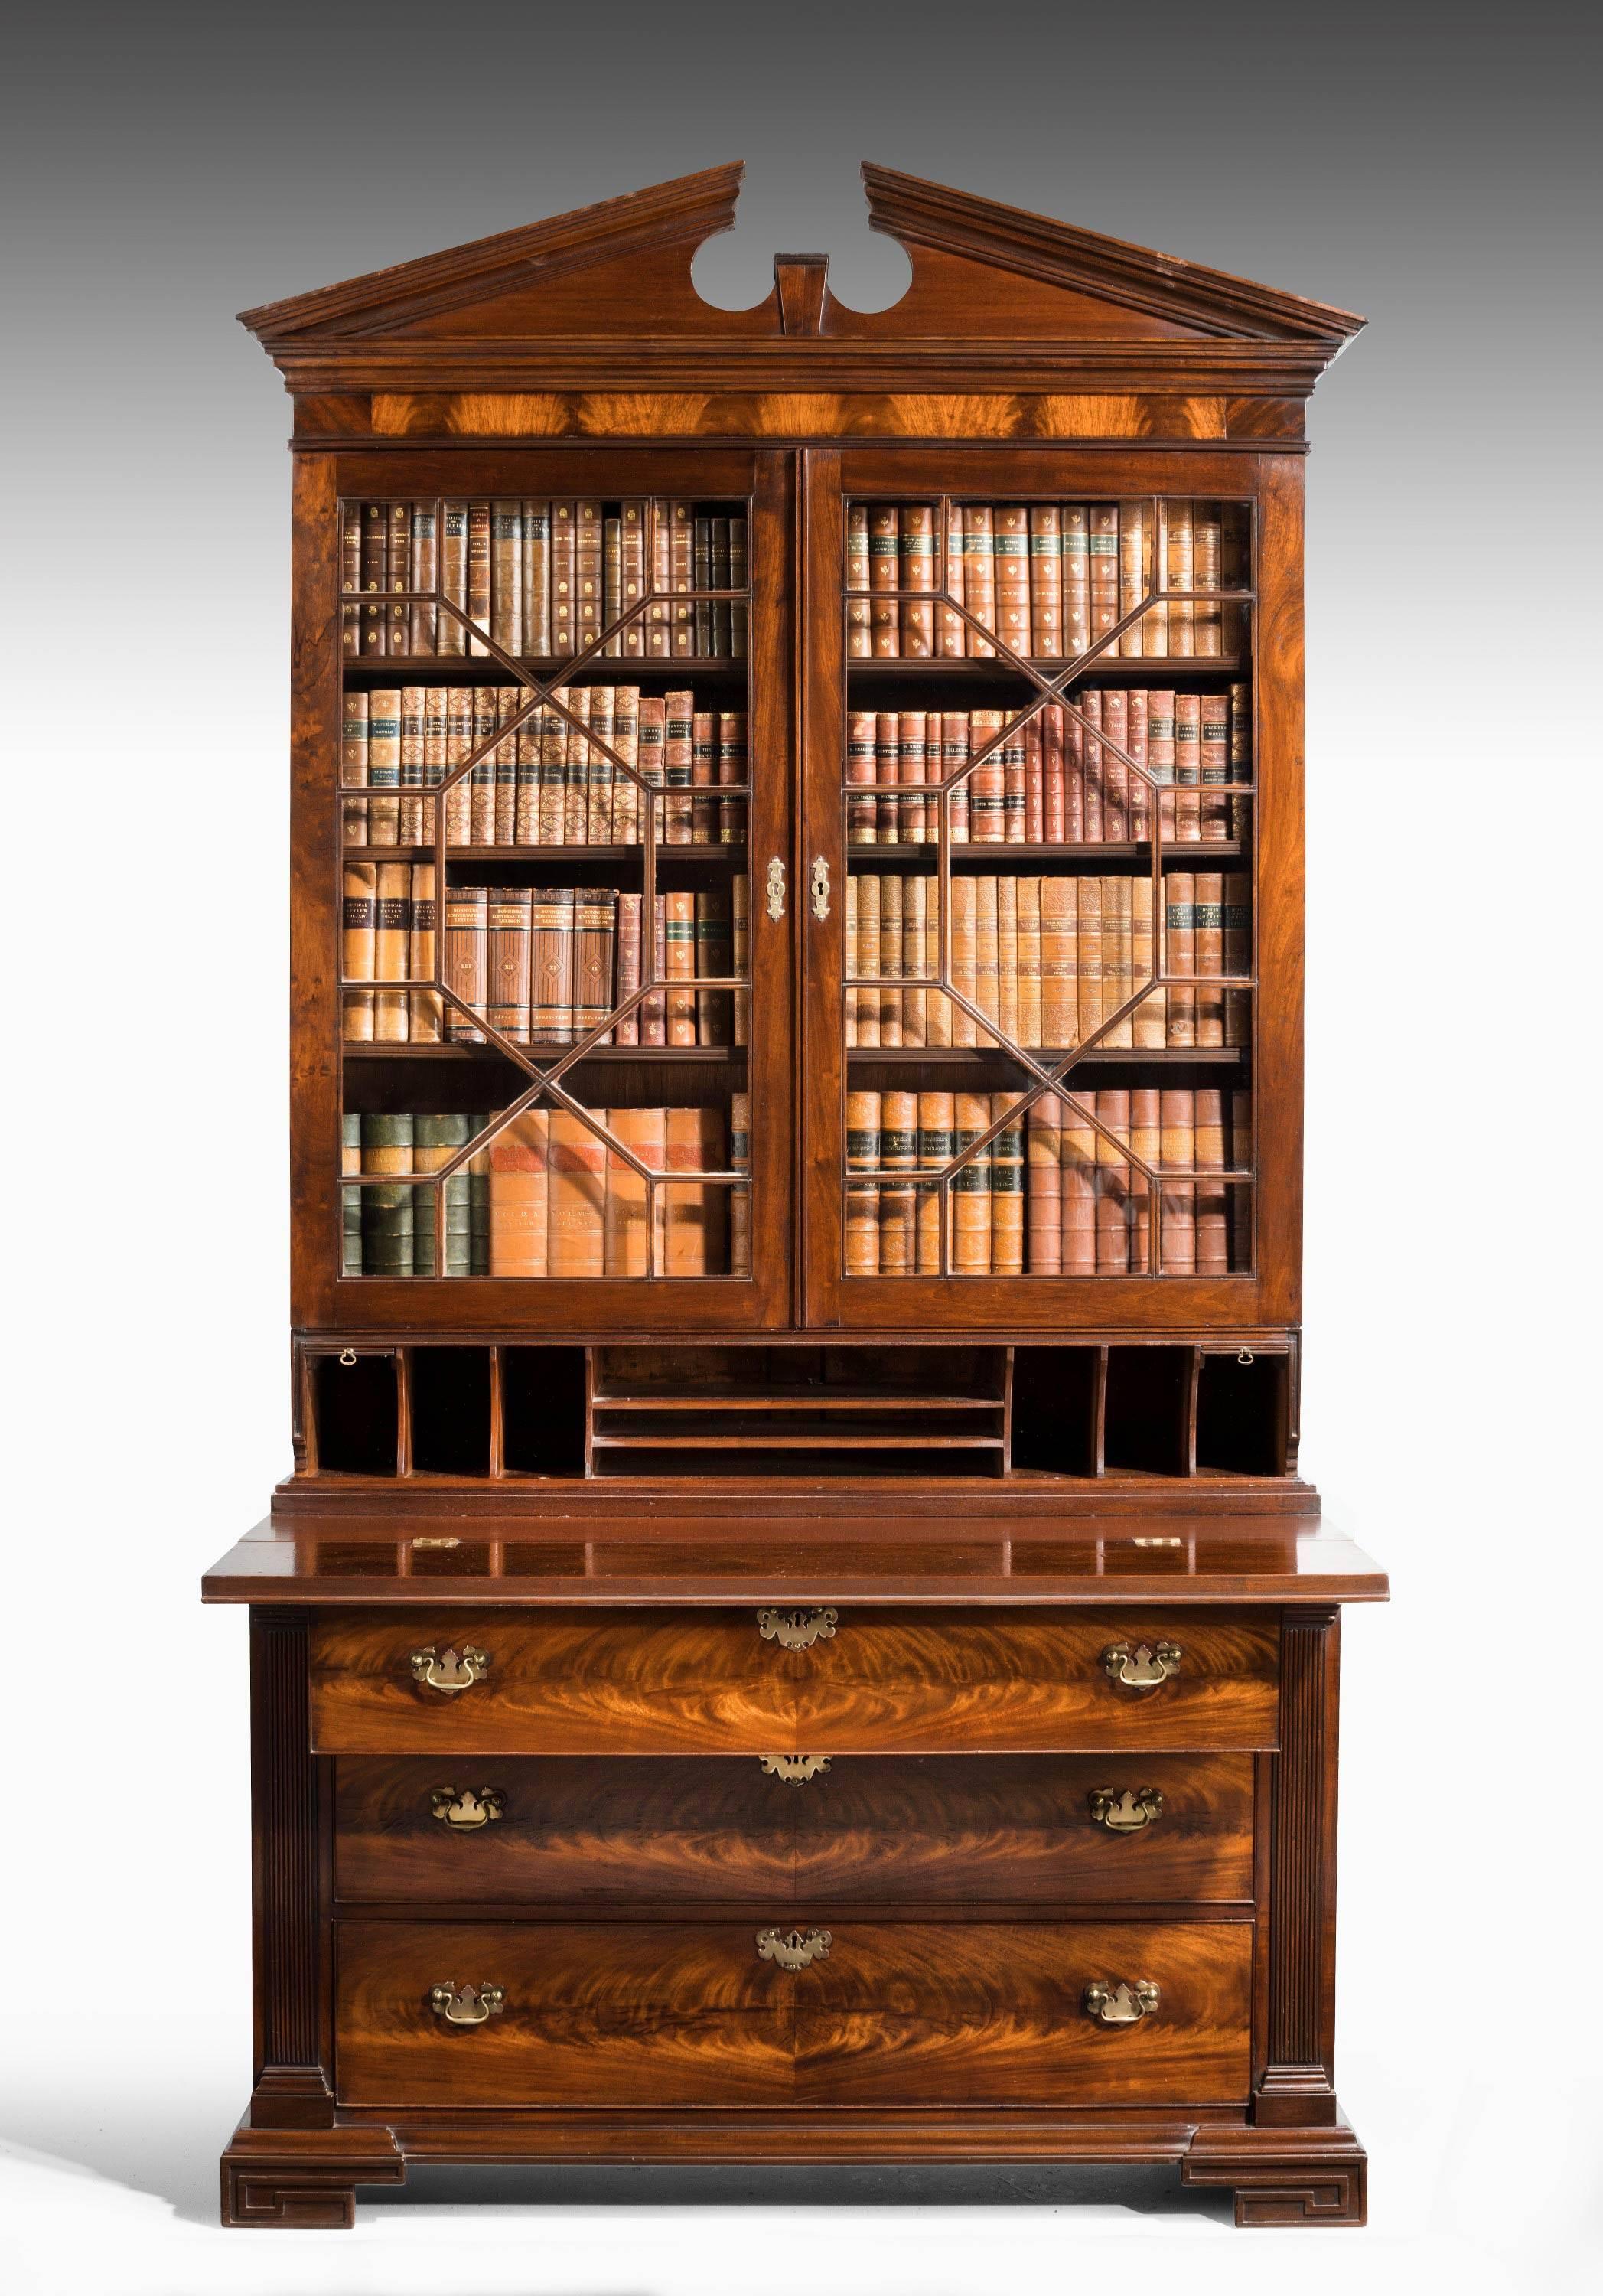 Chippendale period mahogany secretaire bookcase with well fitted interior For Sale 2